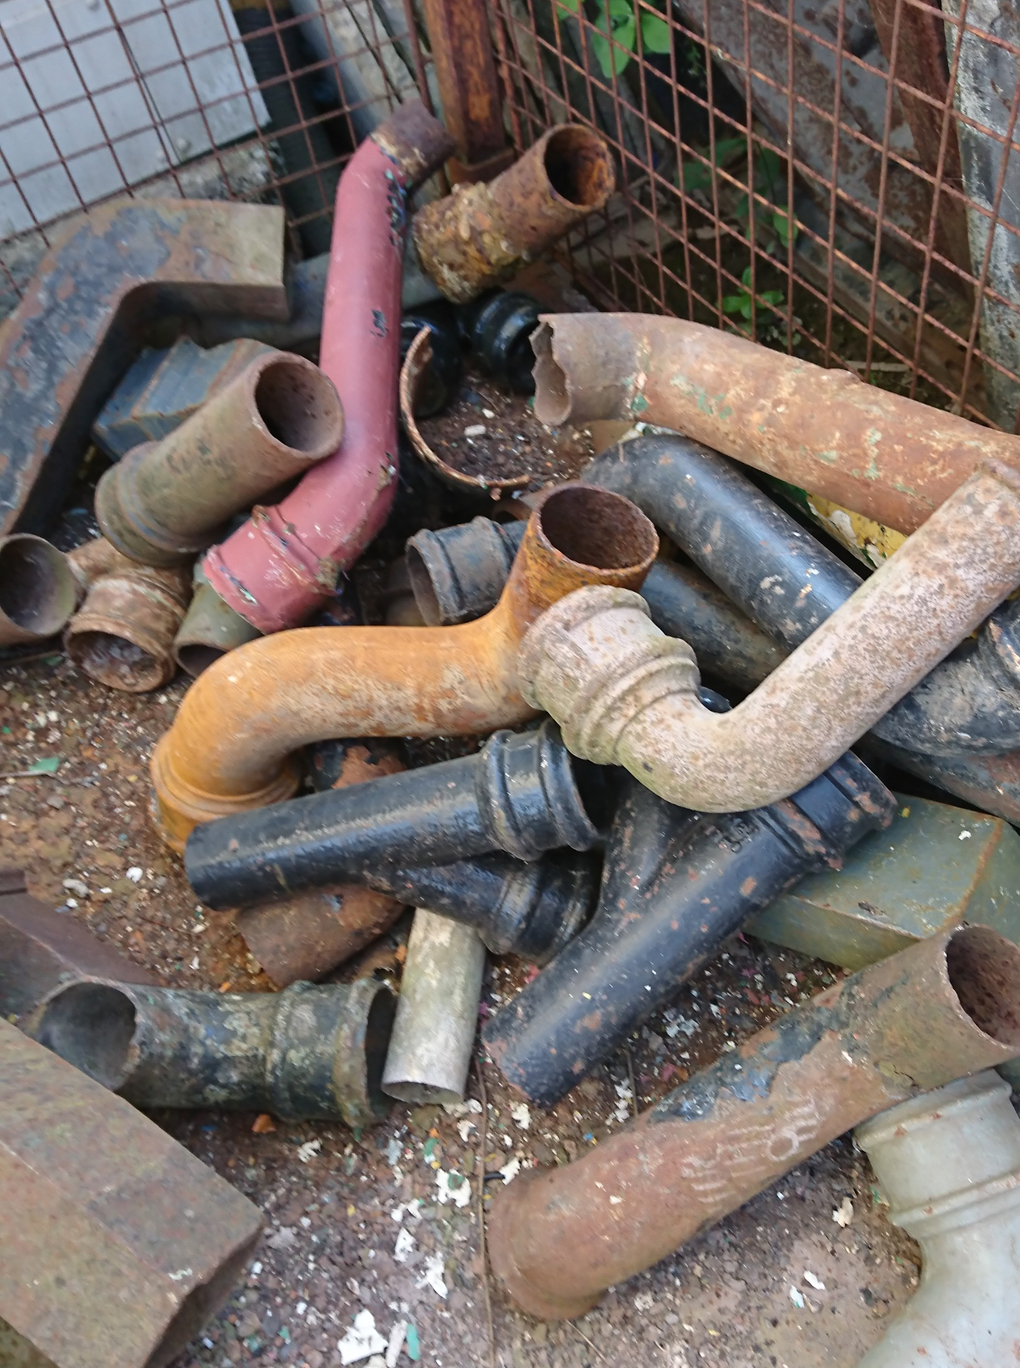 A collection of colourful pieces of pipe thrown down in heap at a Reclamation Yard. Could this be art? Aah we do such exciting things!!!!